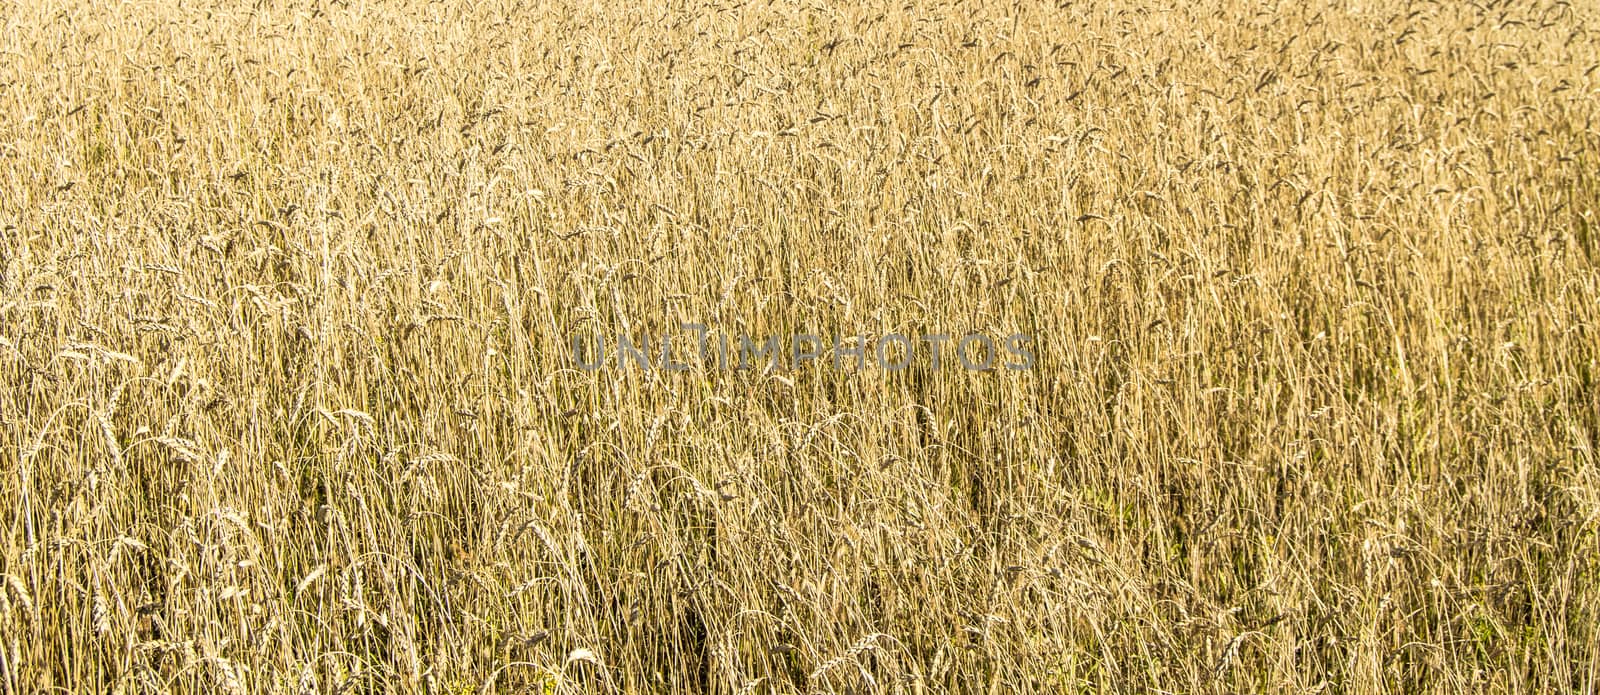 Wheat field with Golden ears. Rural landscape under bright sunlight. Background of the ripening ears of wheat field. The concept of a rich harvest by claire_lucia